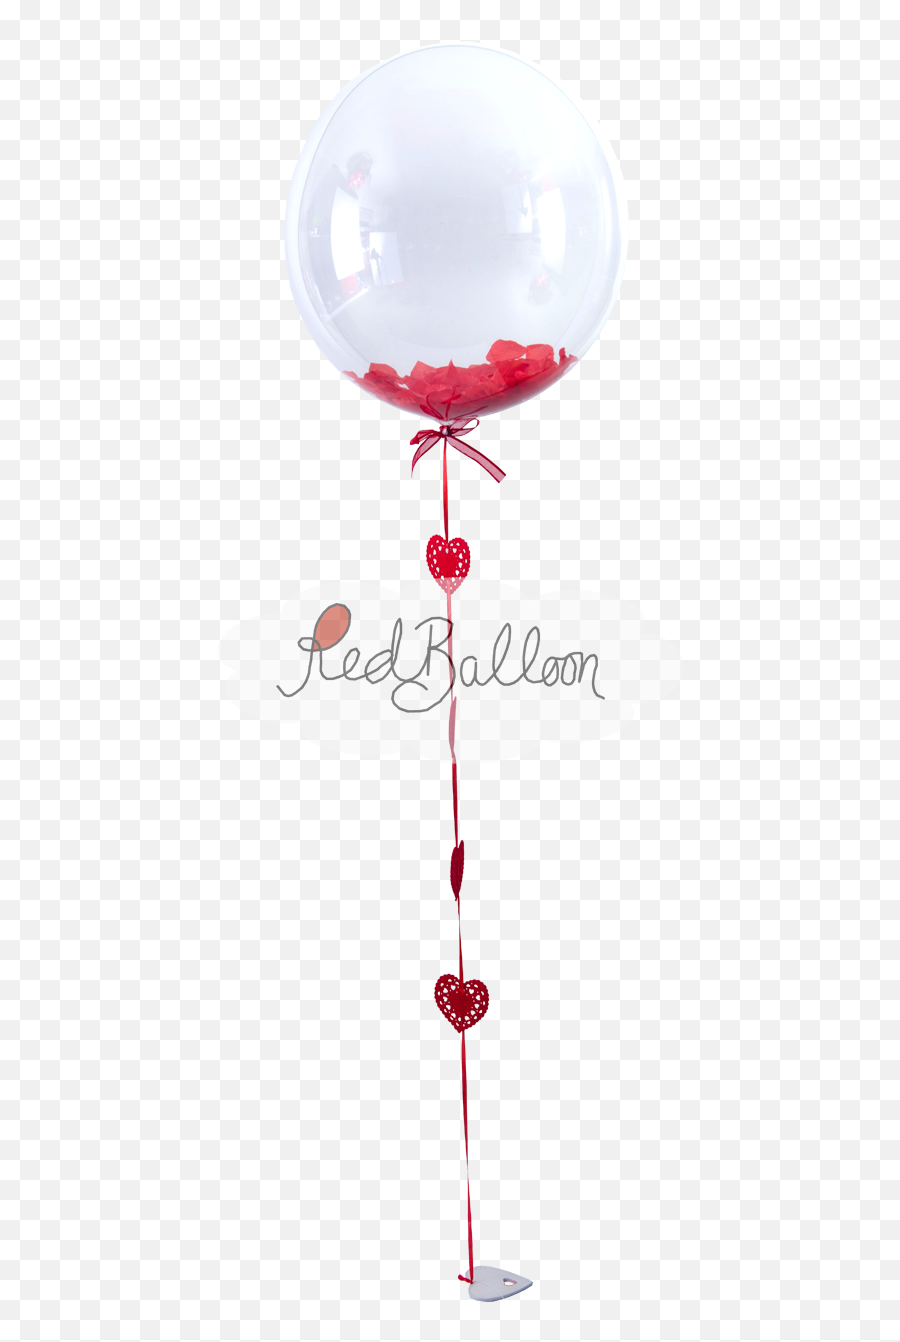 Balloons Cork By Red Balloon Png Image - Balloon Emoji,Red Balloon Png